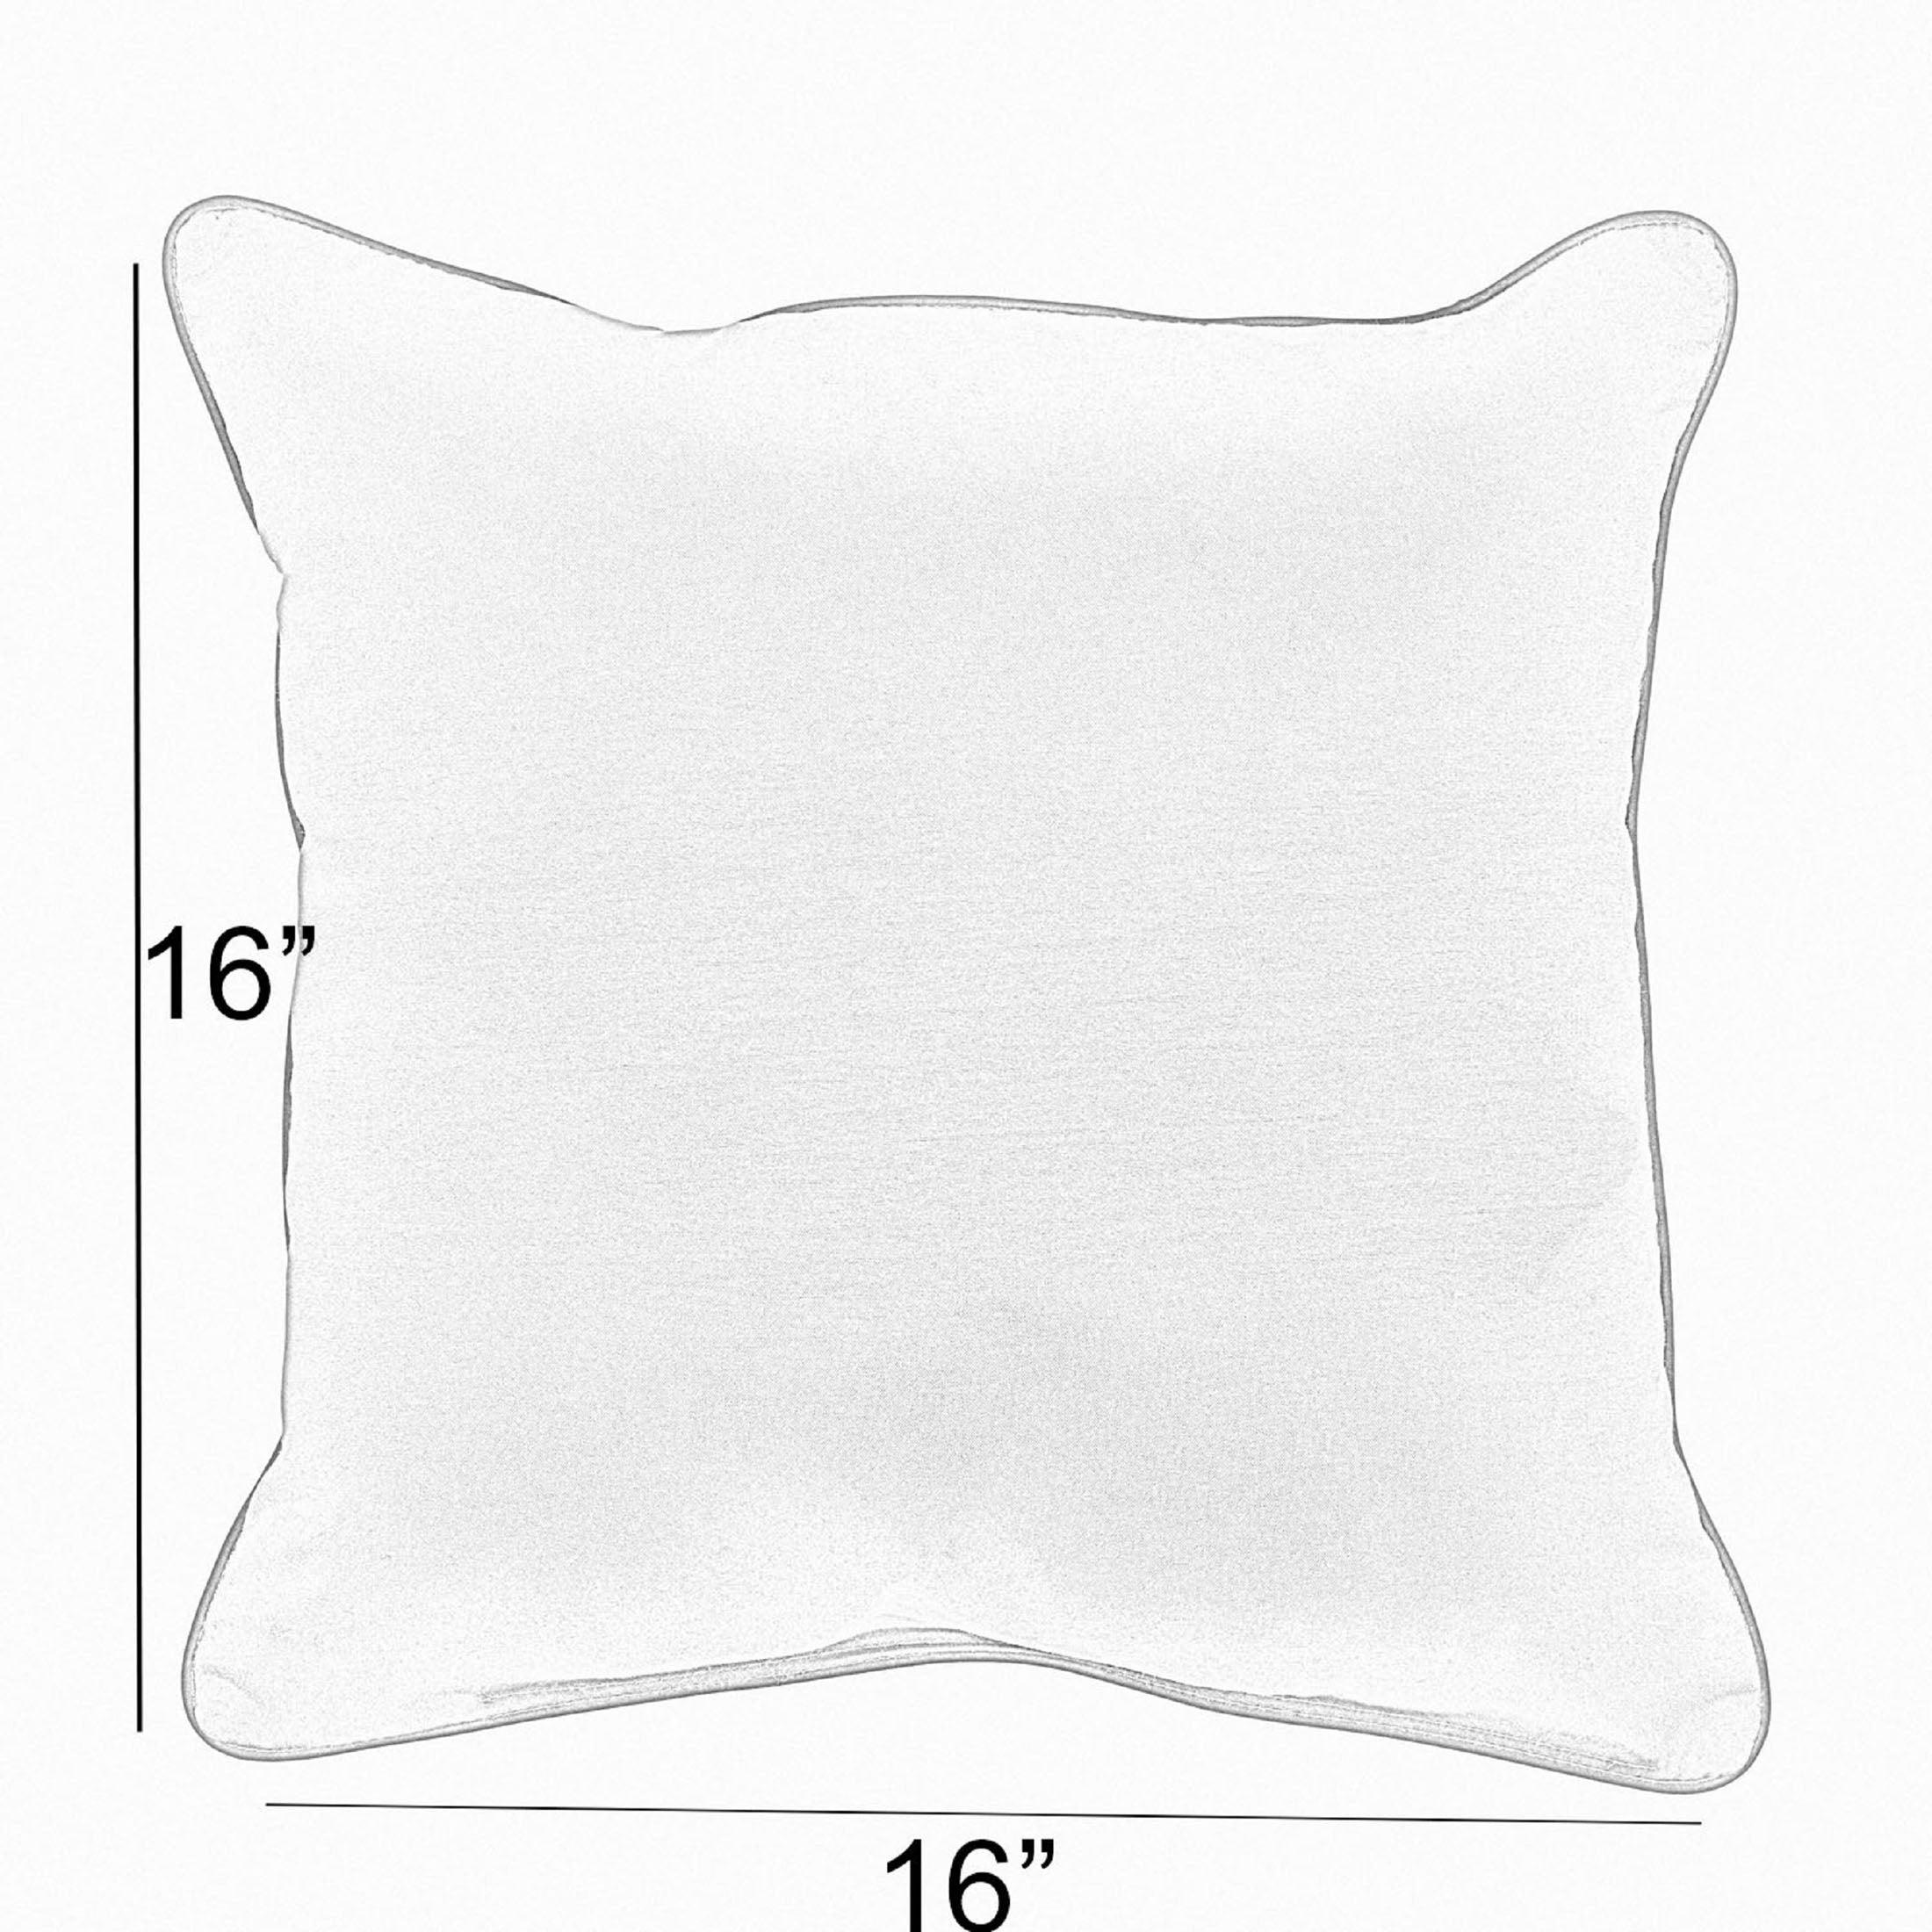 Sunbrella Berenson with Contrast Cording Square Corded Pillow (Set of 2) - Sorra Home